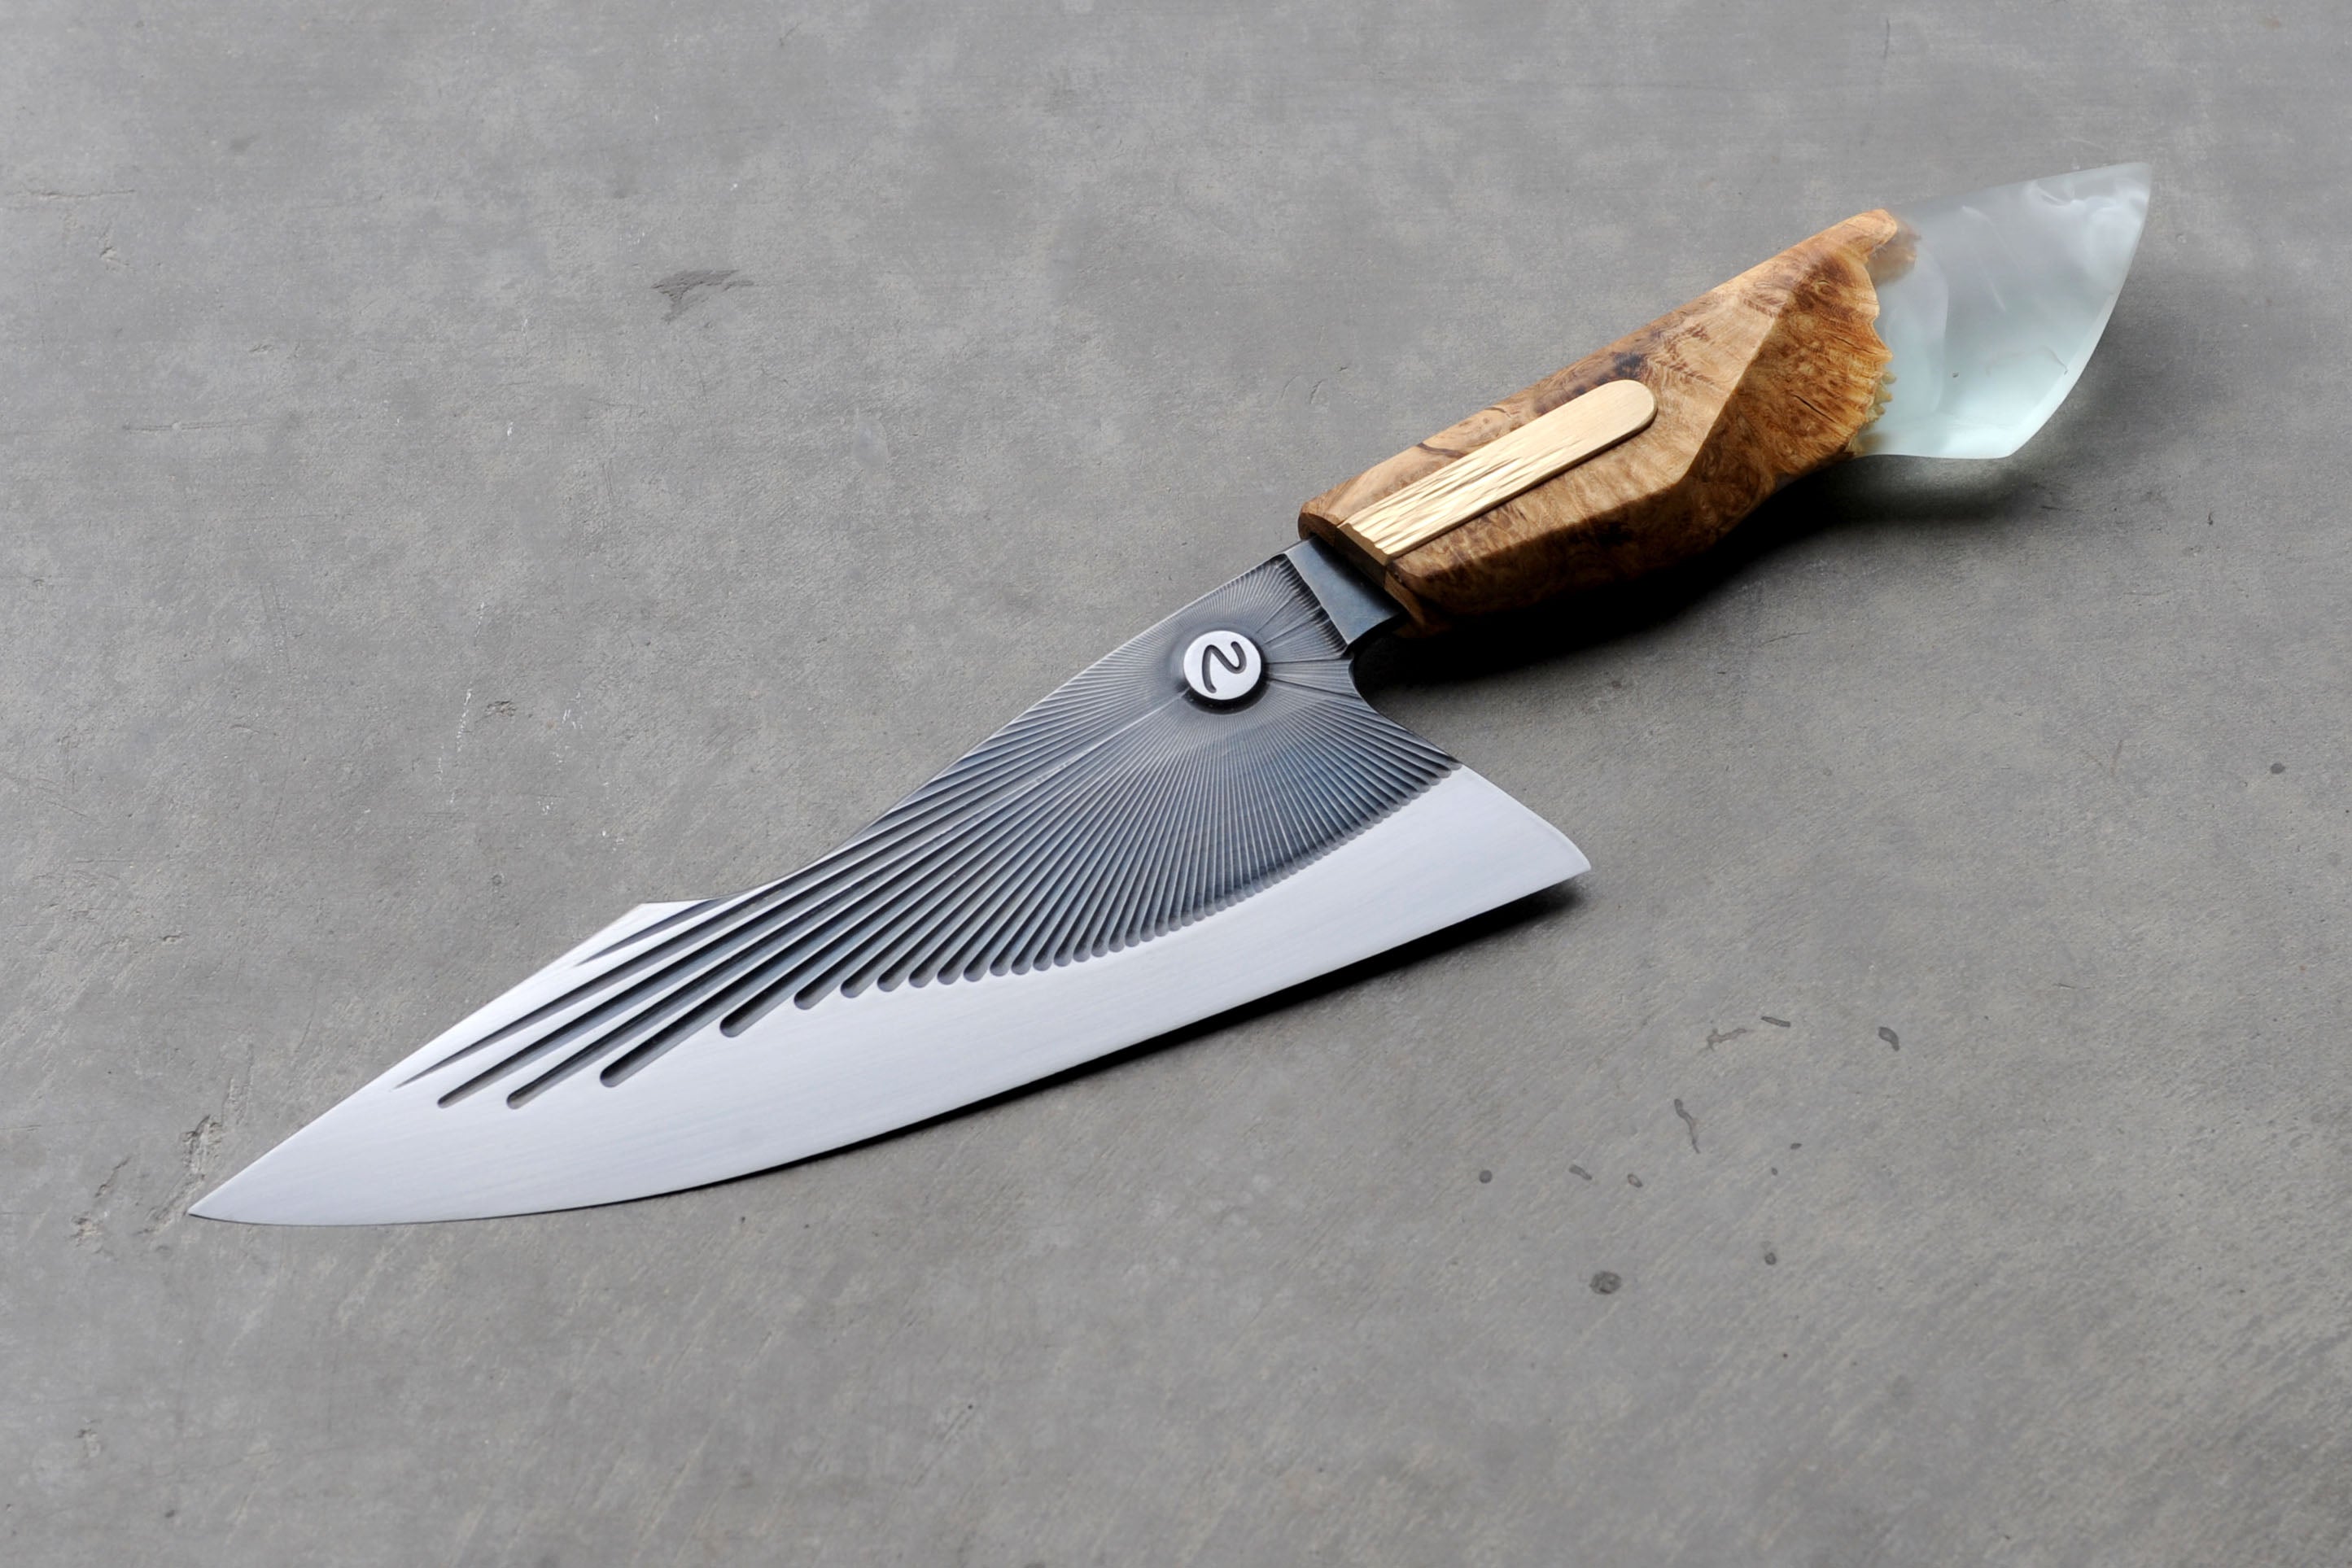 Yellow Cedar Burl Valkyrie Chef's Knife -- Available October 21, 10AM Pacific